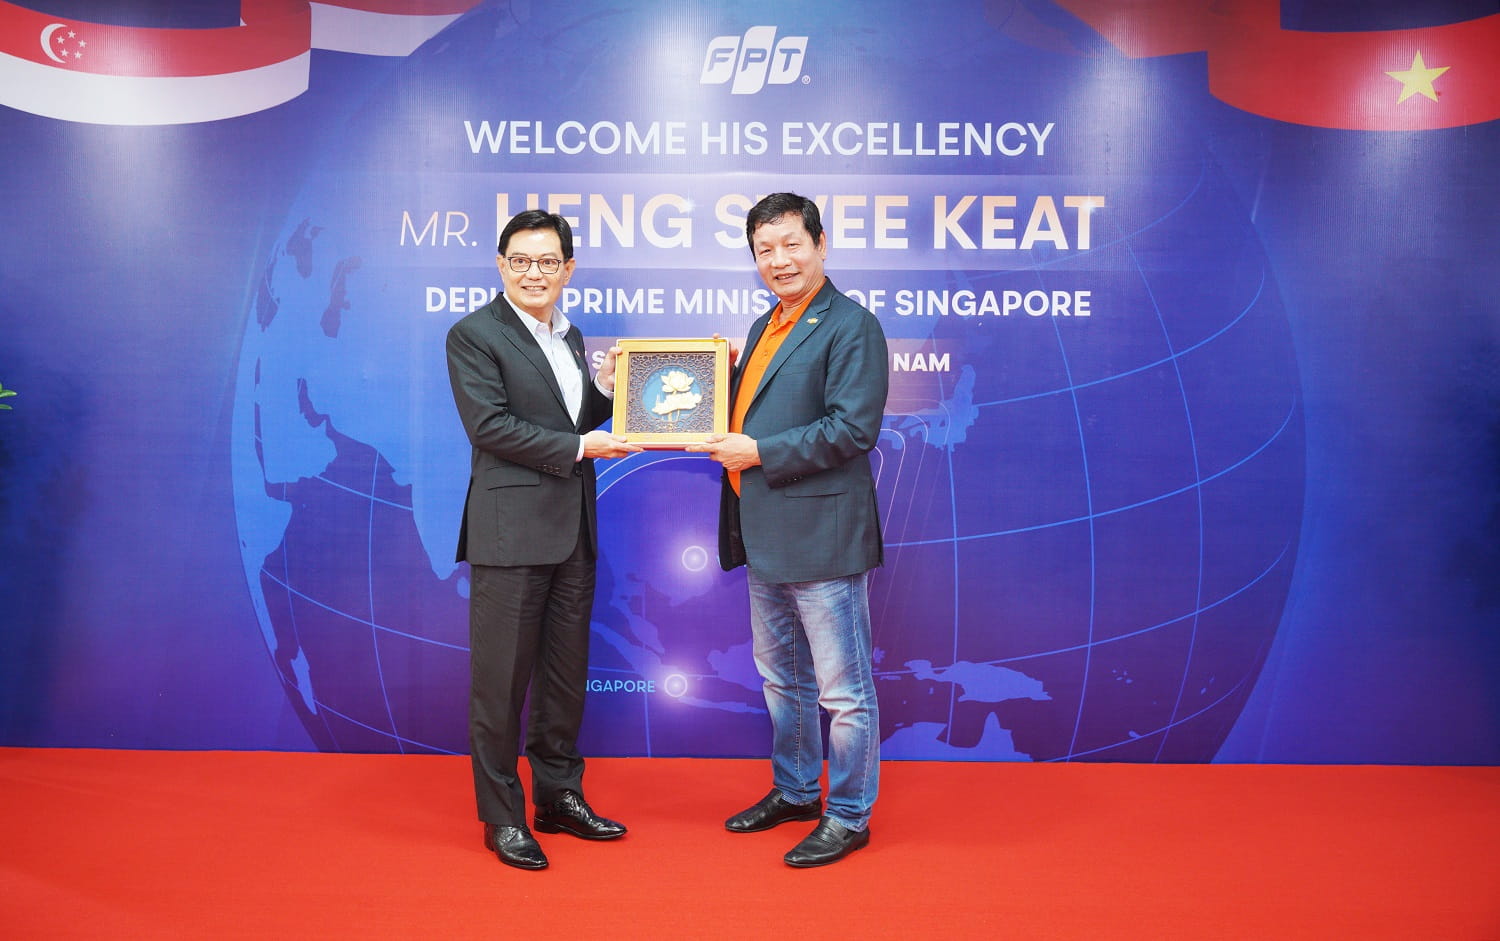 FPT's Chairman Truong Gia Binh welcomed Singapore's Deputy Prime Minister Heng Swee Keat on 13 Sep